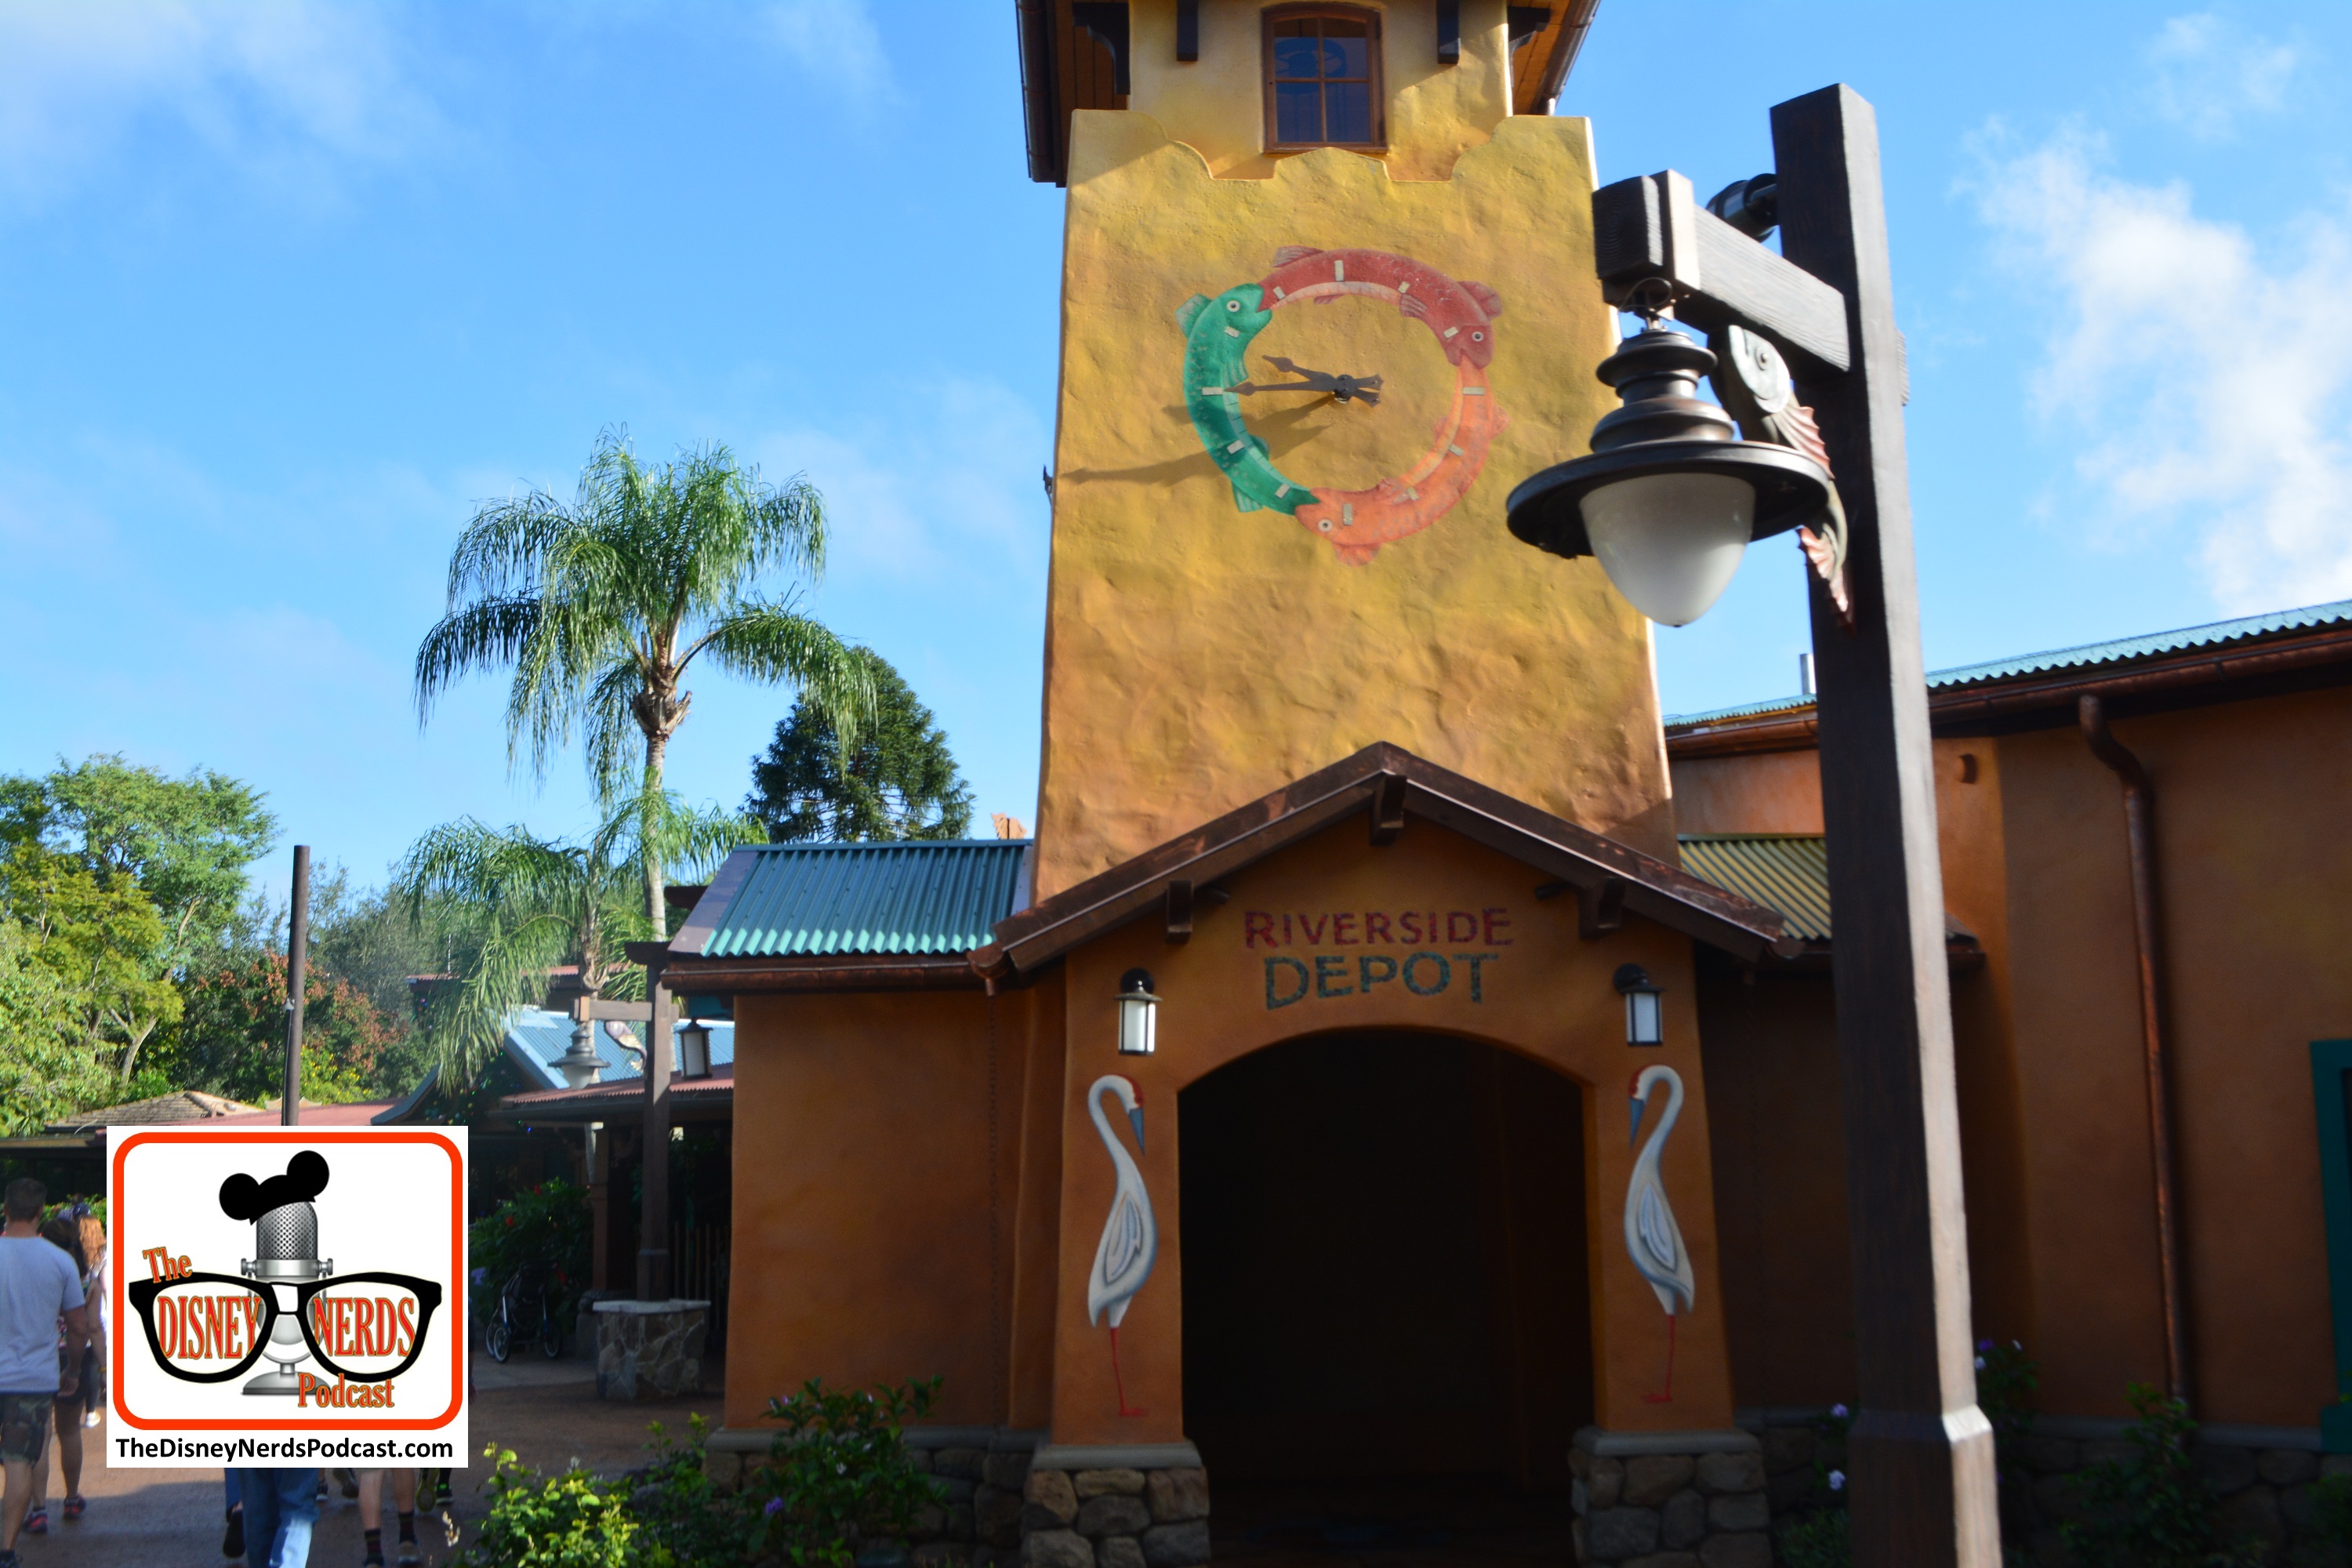 2015-12 - Animal Kingdom - Riverside Depot - a New Merchandise Store is ready to open any day. As you walk from Oasis toward the tree of life, this is on the right side - it was behind walls for the last Disney Nerds Podcast photo report